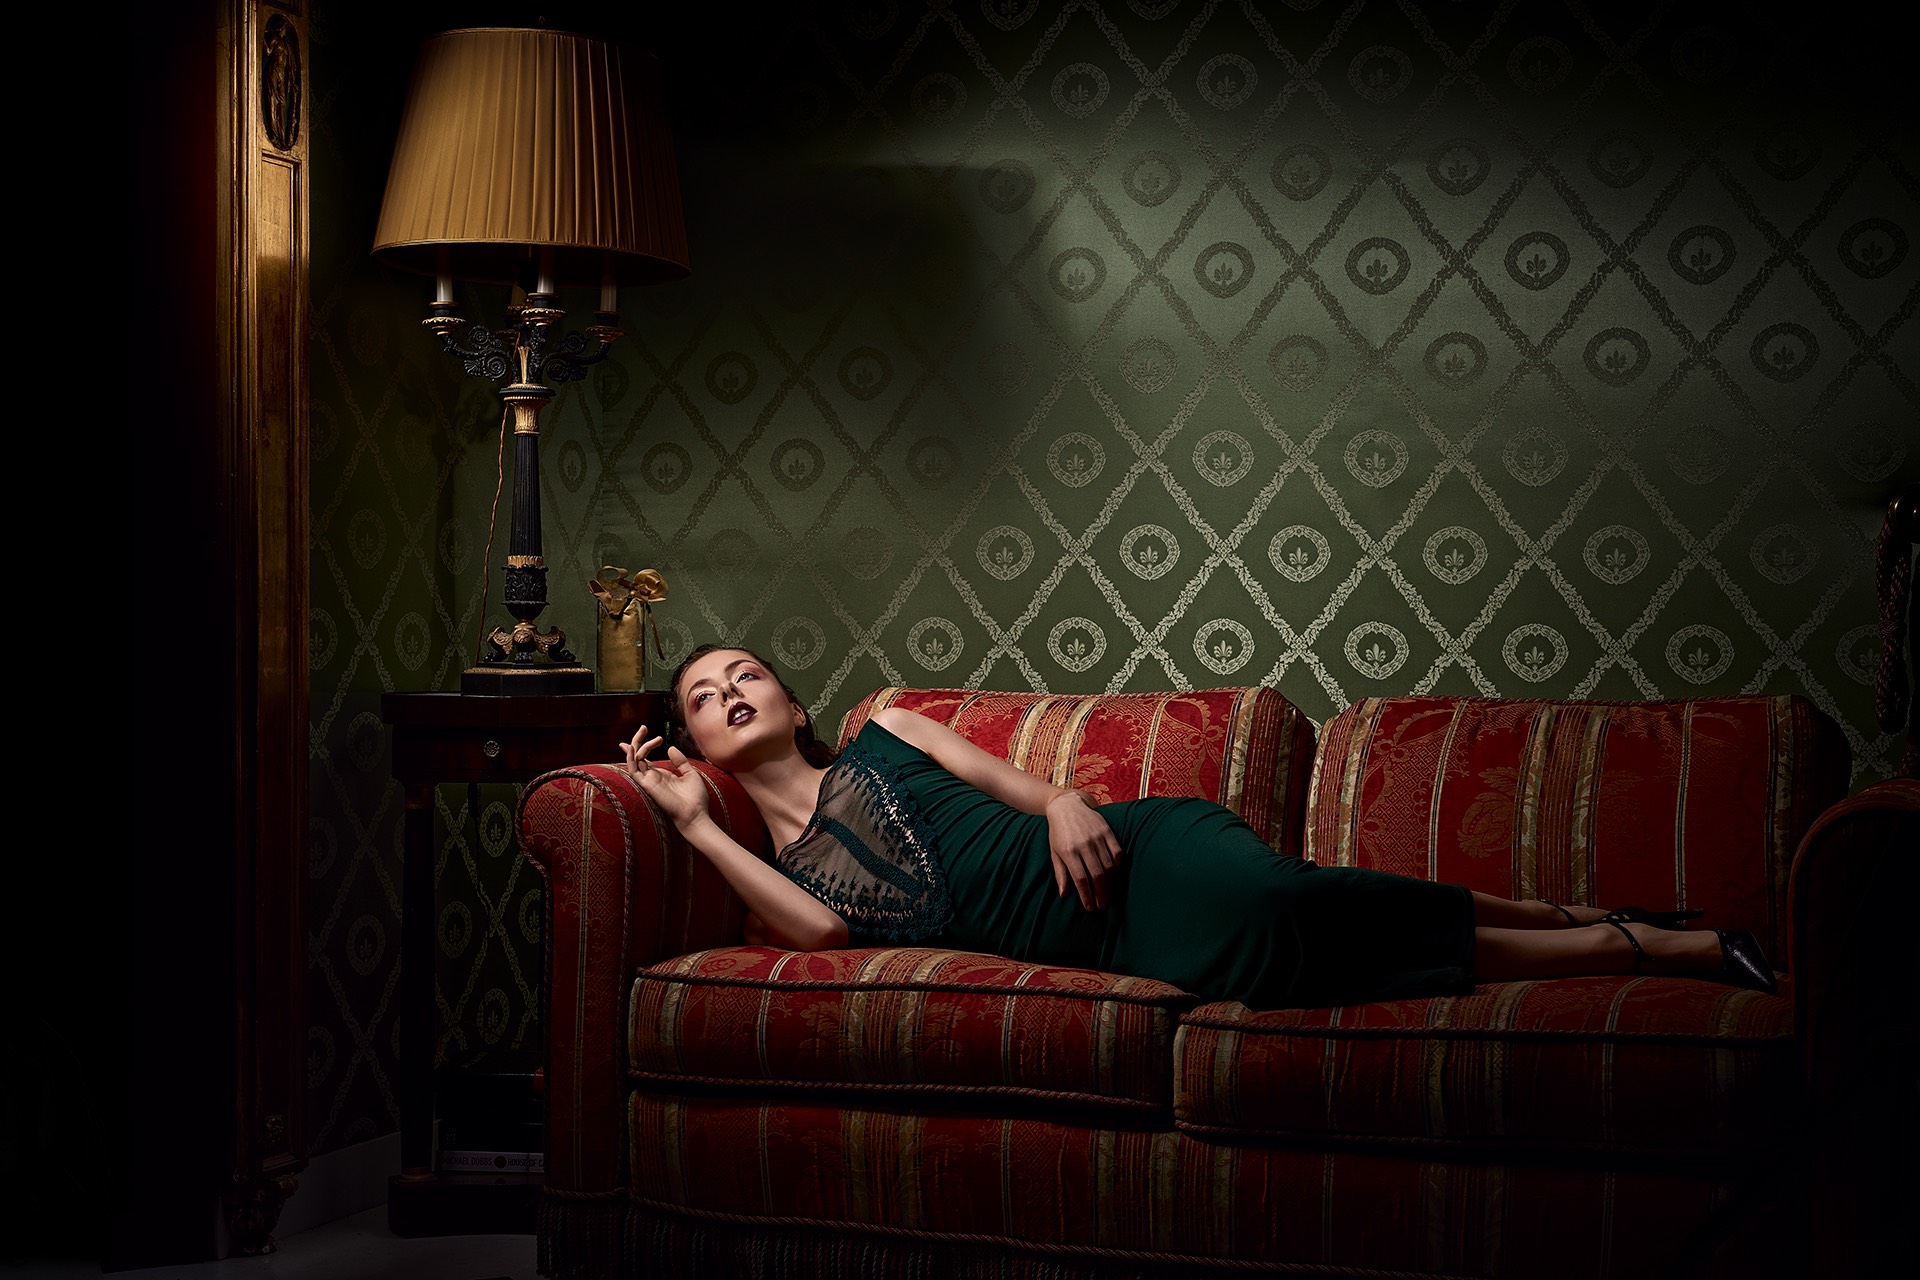 "Lady on the red sofa". A stage photography portrait in flash light.